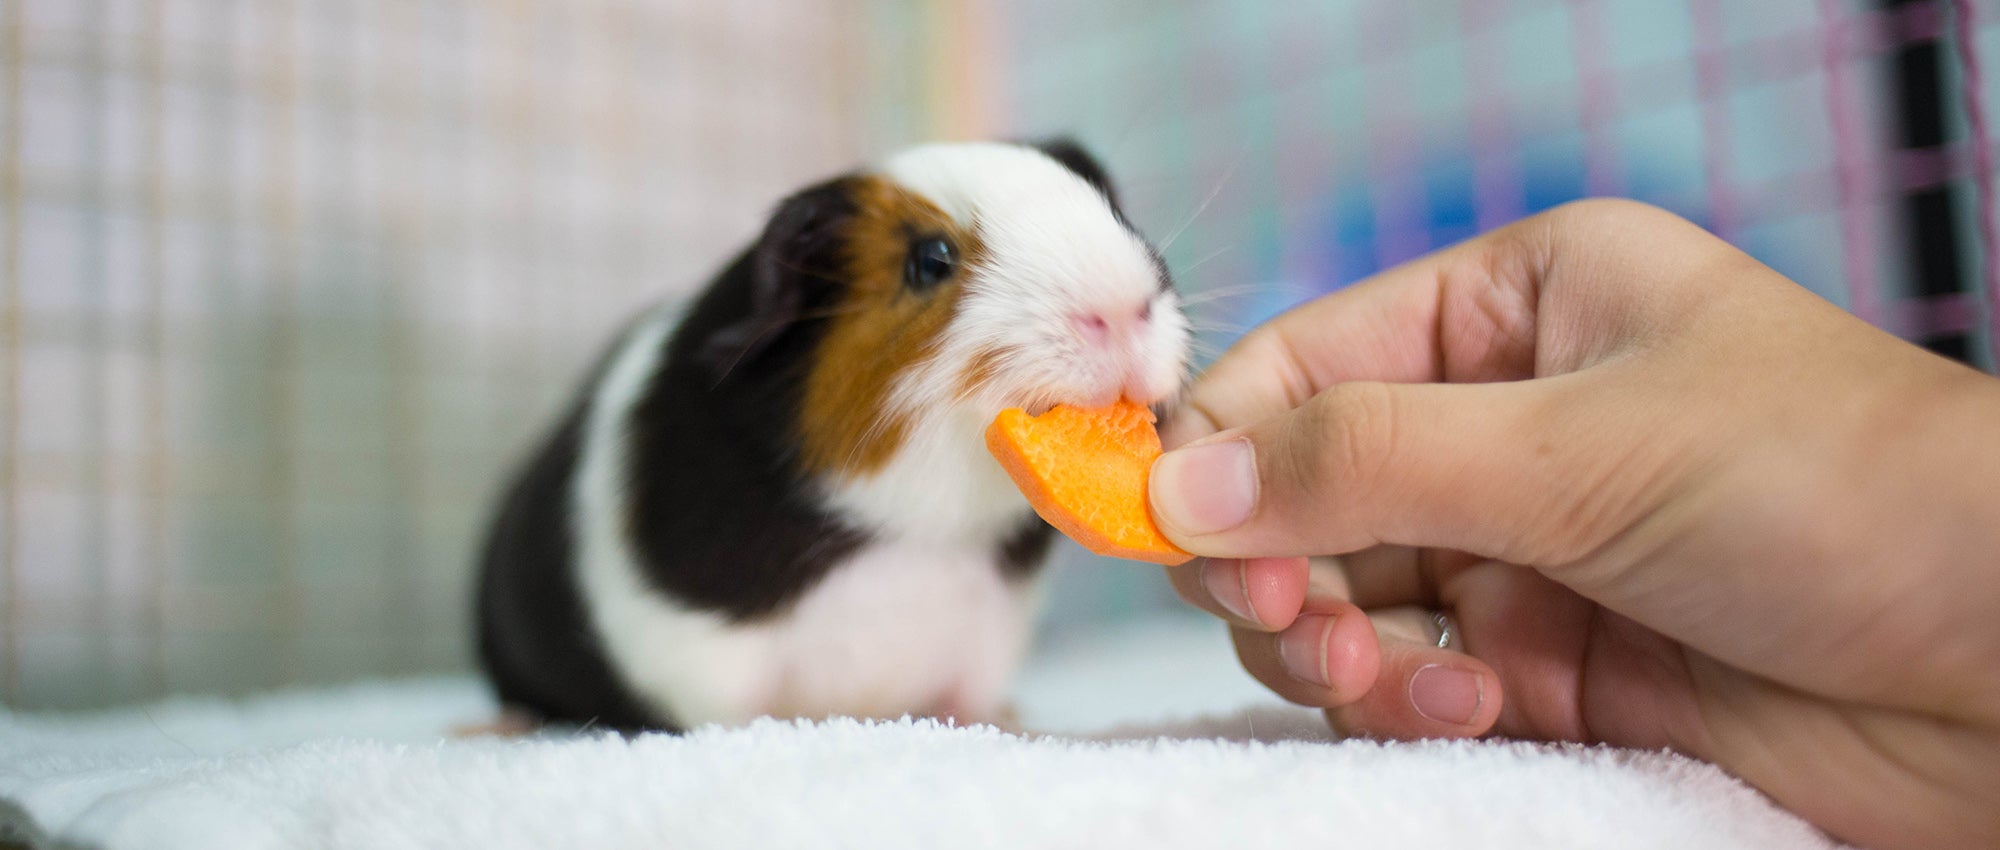 What can guinea pigs eat? | The Humane Society of the United States